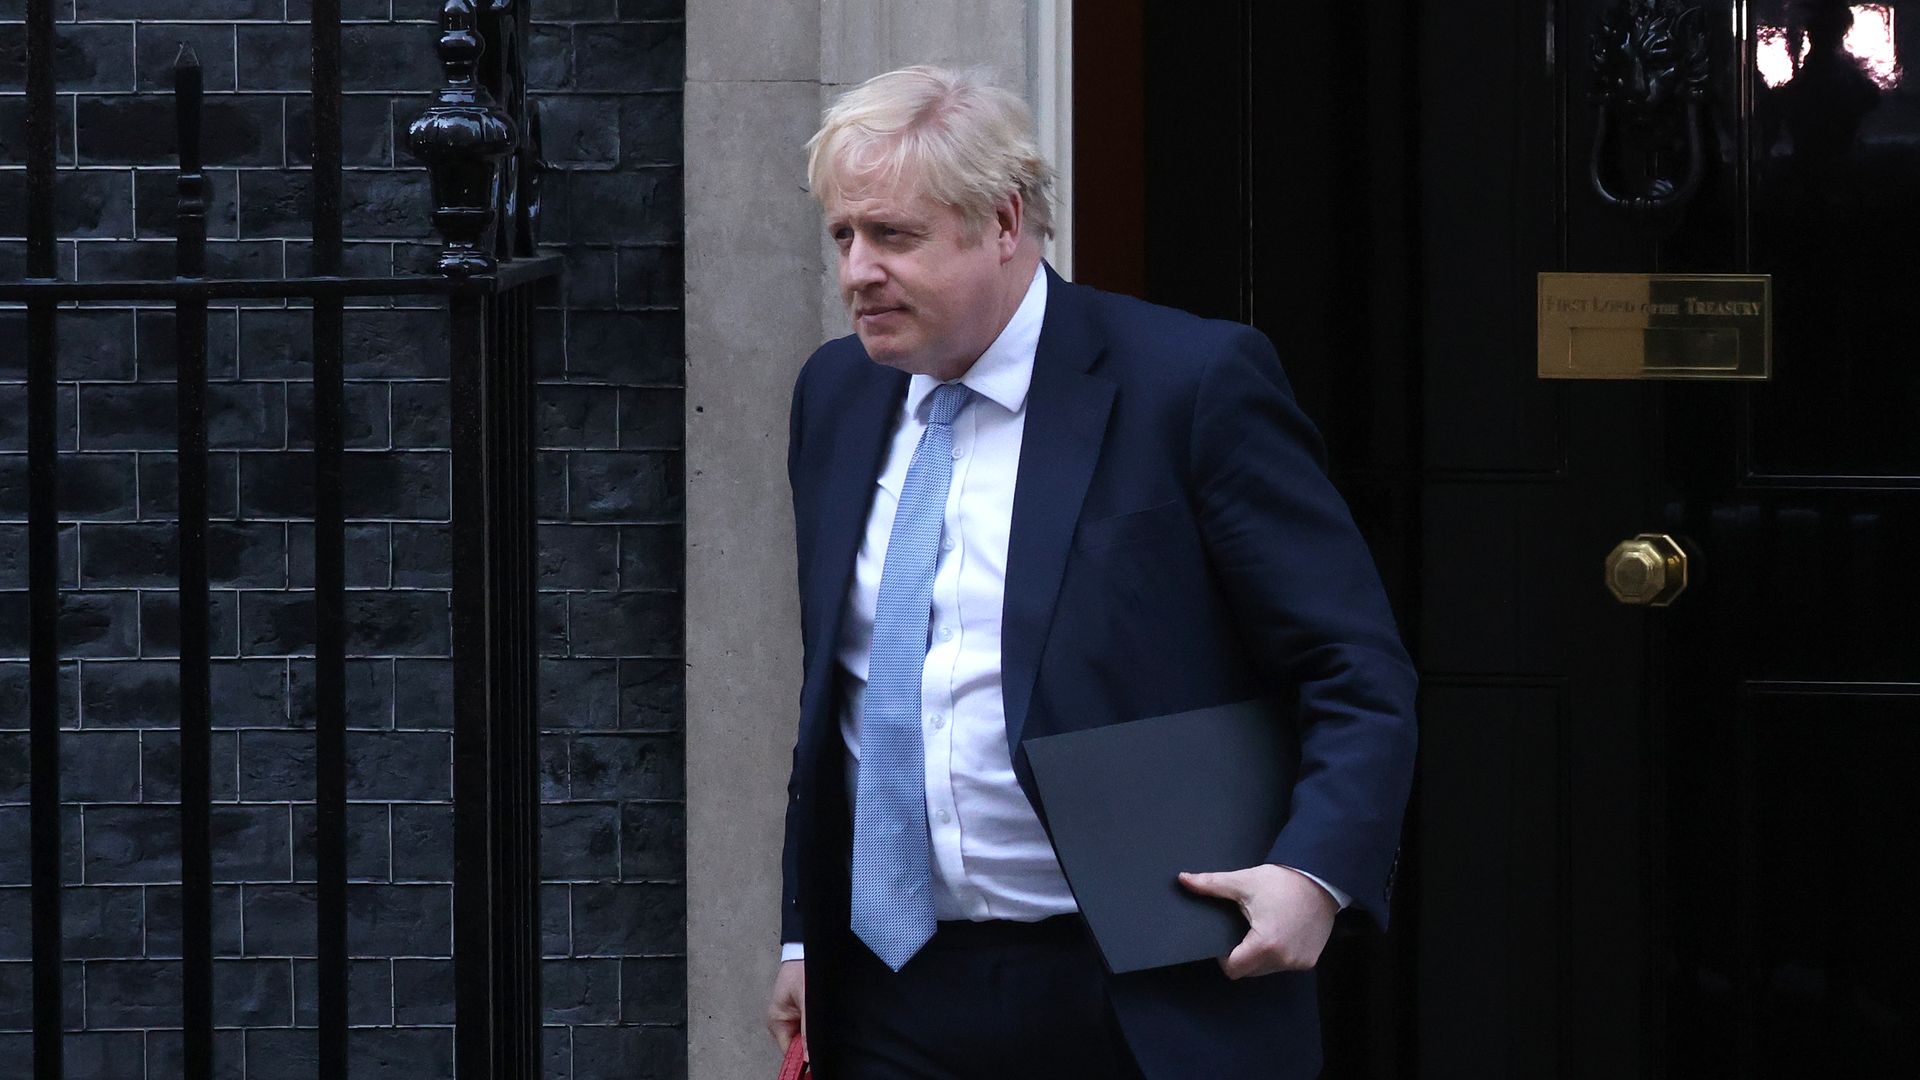 Prime Minister Boris Johnson leaves 10 Downing Street to make a statement at Parliament on January 31